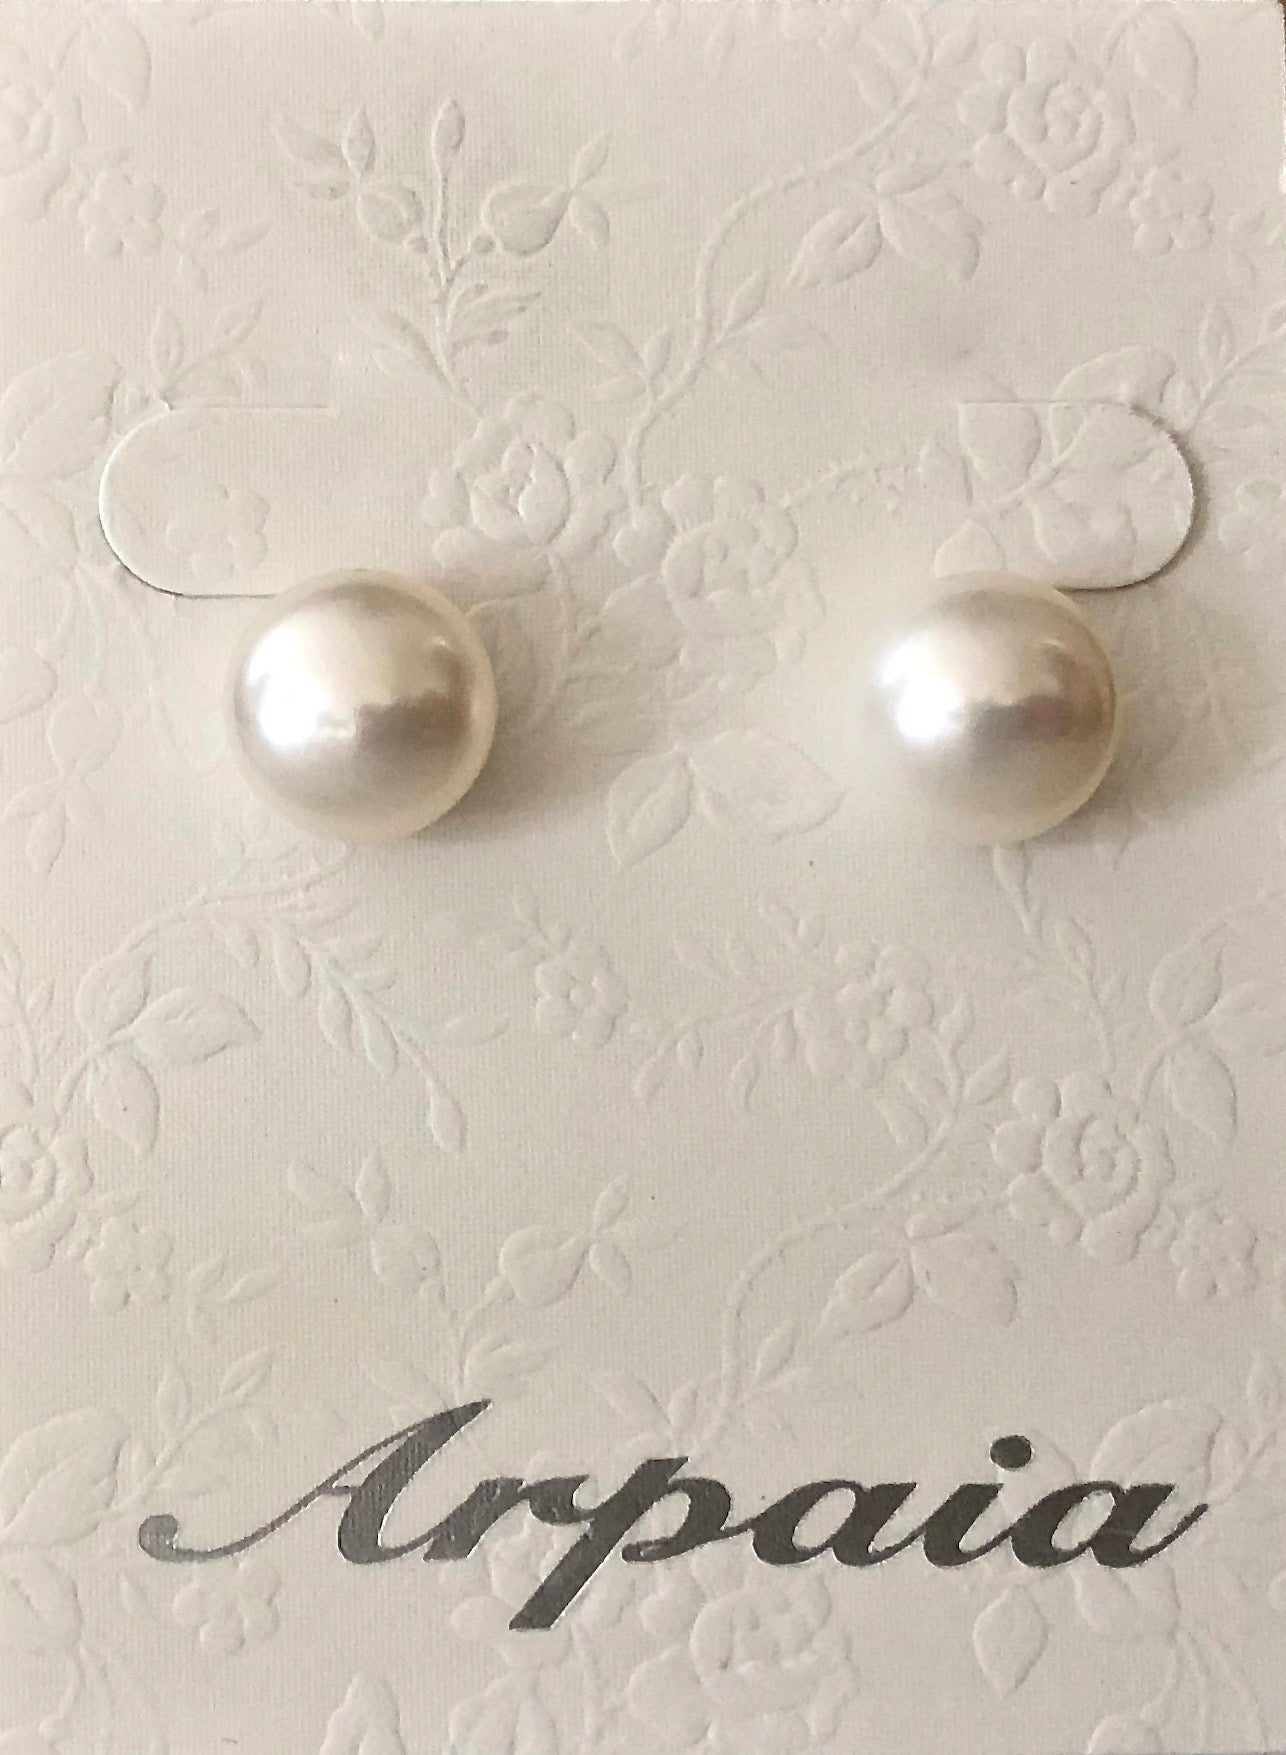 Arpaia 11-11.5mm white cultured freshwater button pearl post earrings